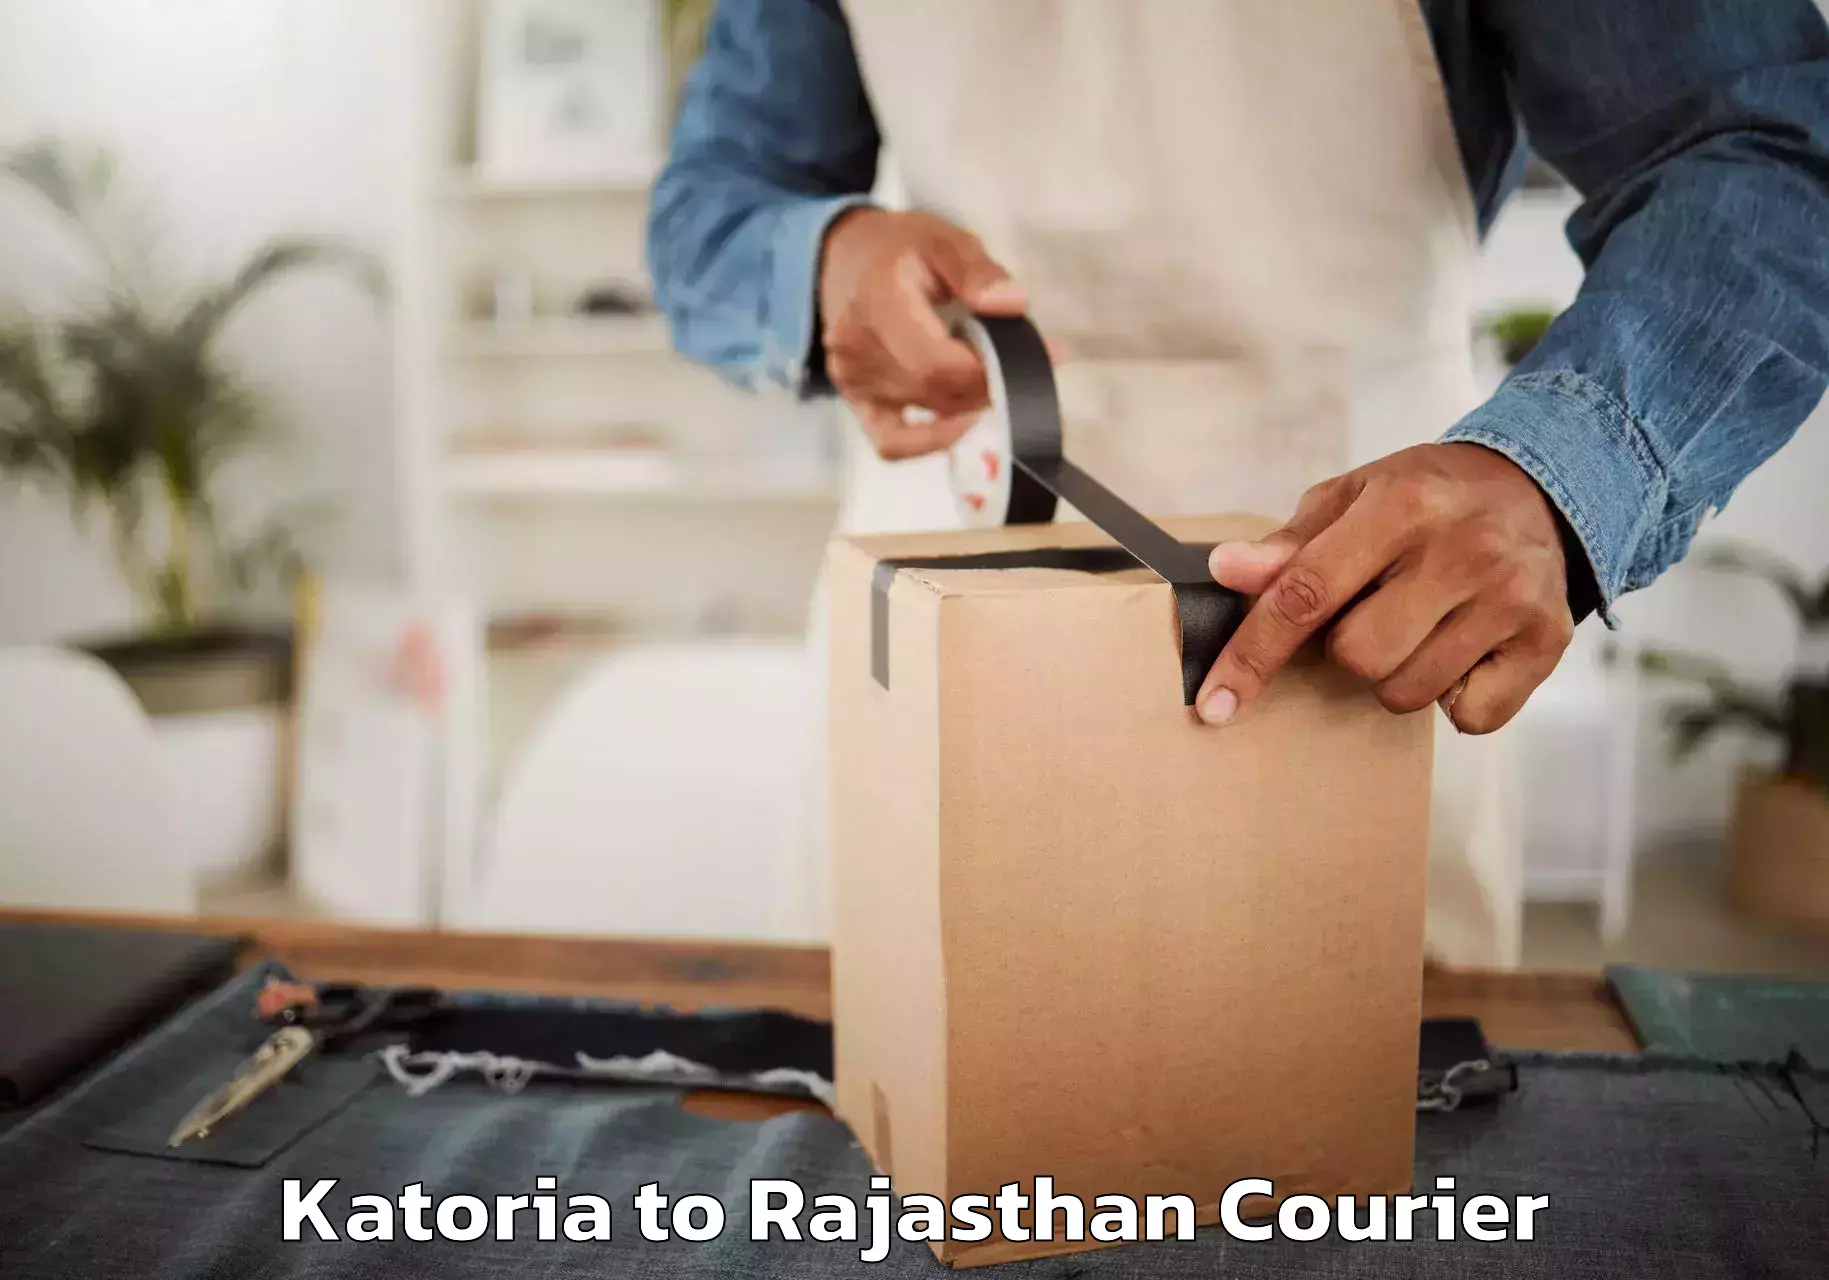 Furniture delivery service Katoria to Rajasthan